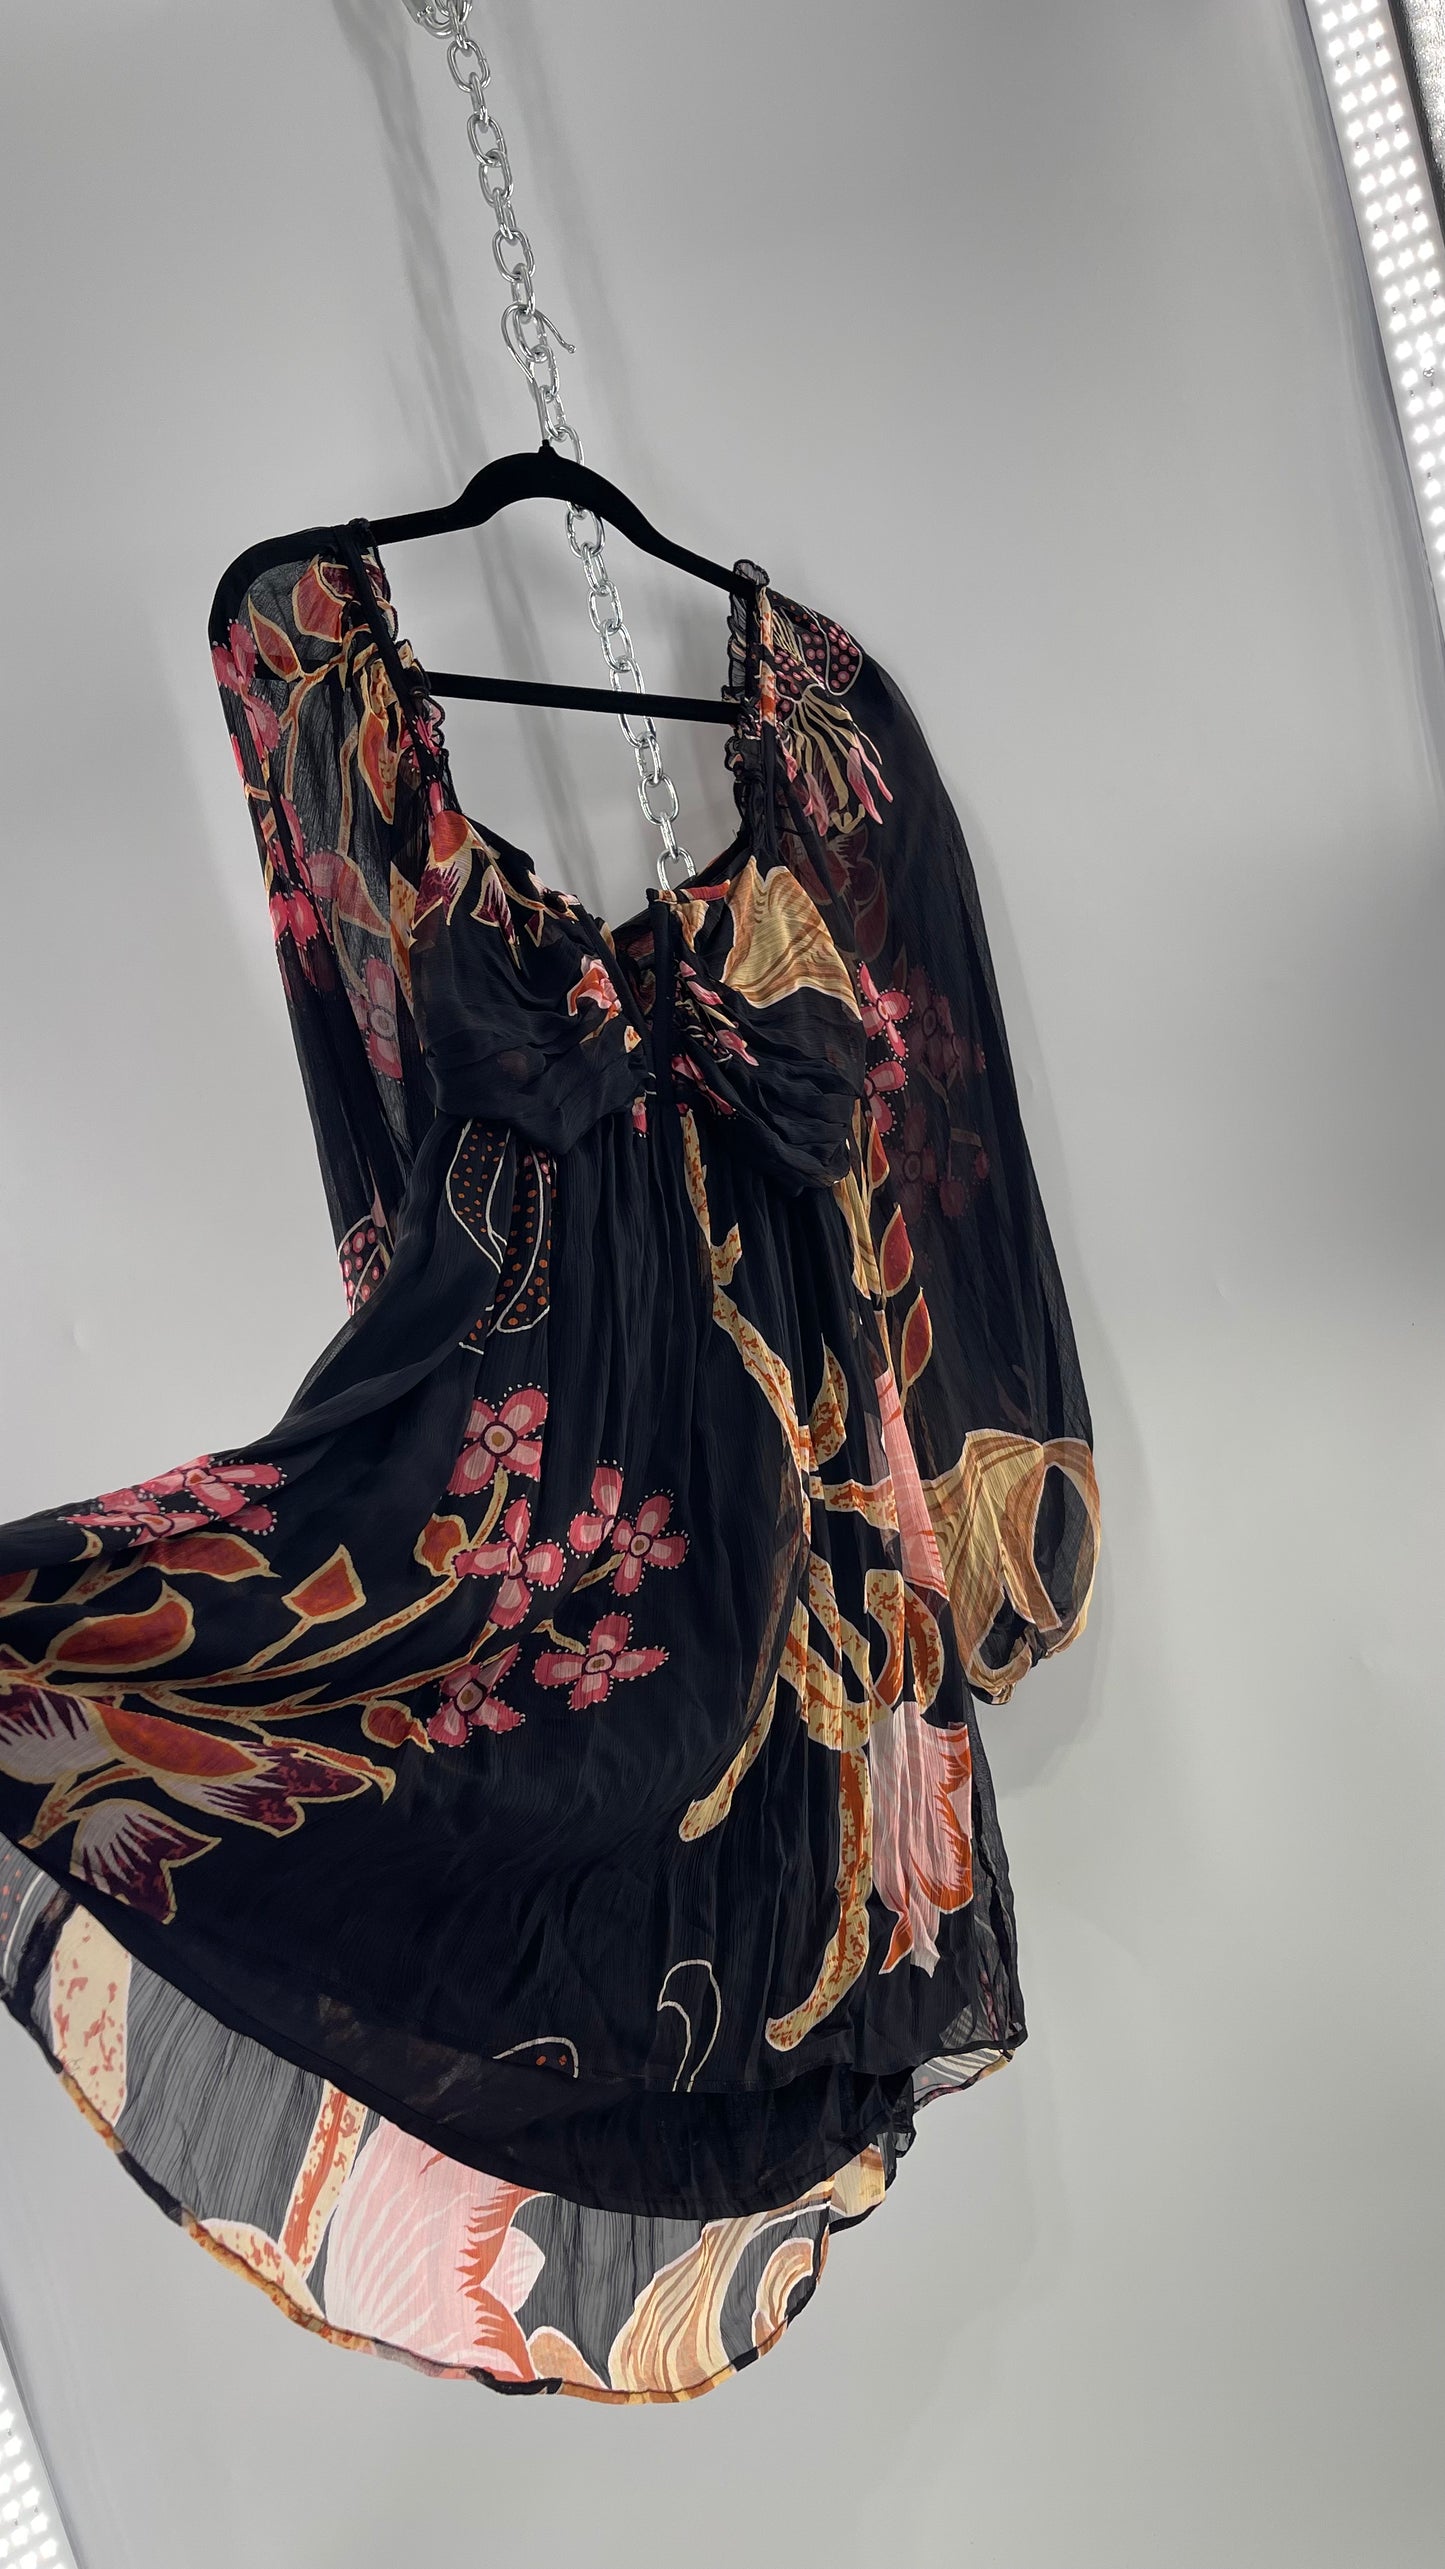 Anthropologie Let Me Be Crimped Black Chiffon Pink Floral Patterned l Dress with Tie/Open Back Detail and Tags Attached (Small)